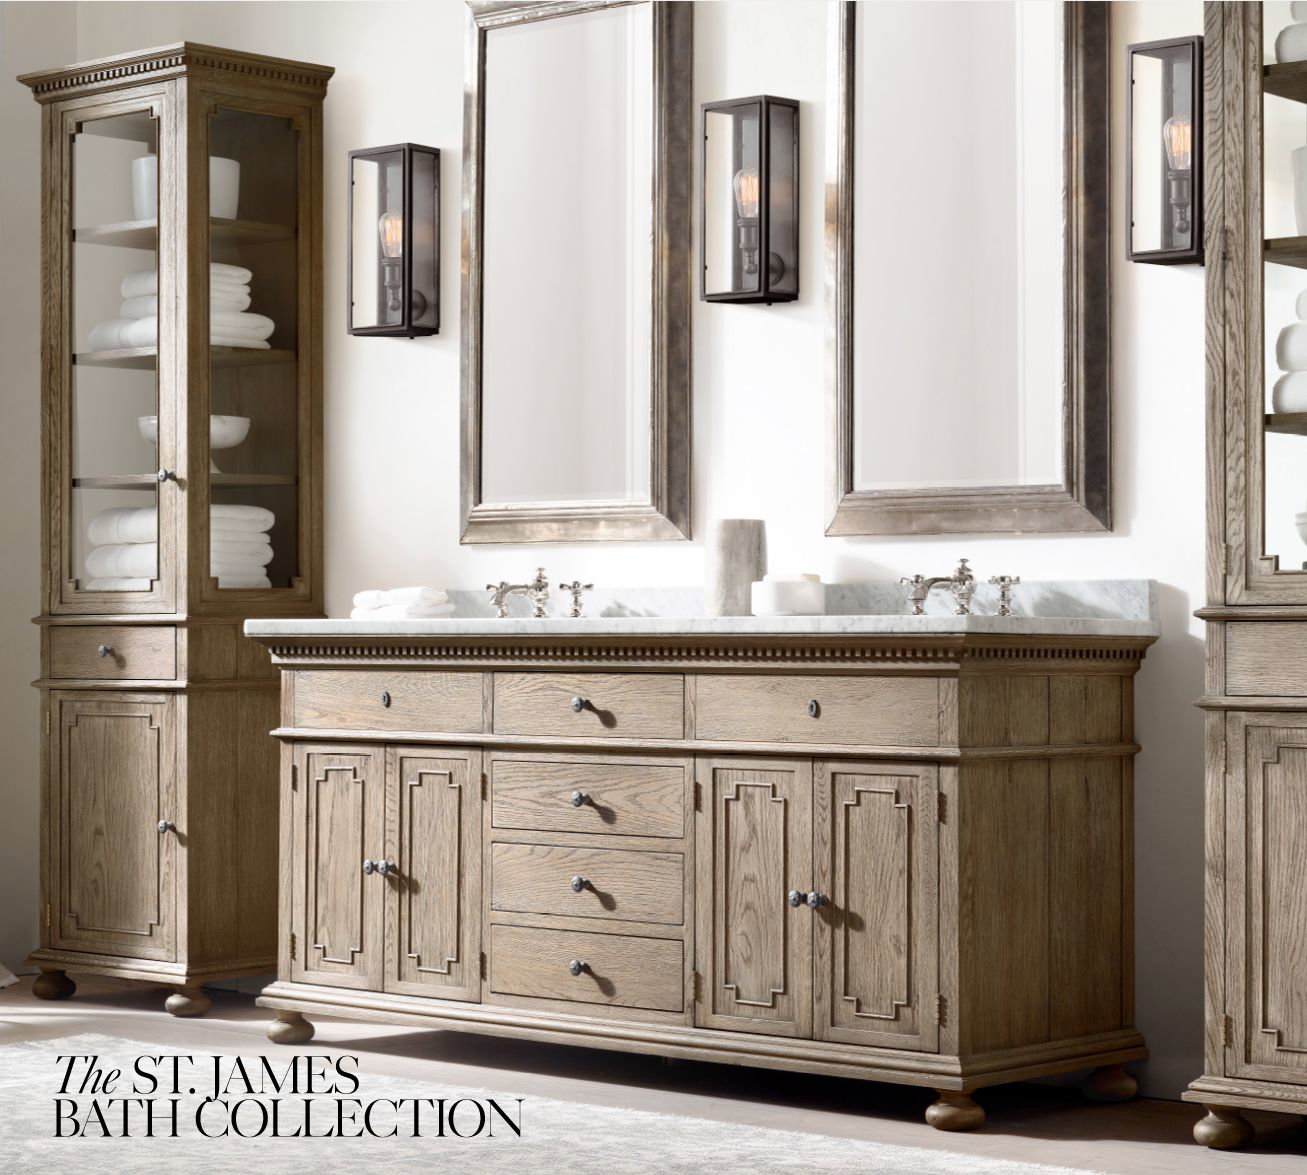 Restoration Hardware The Master Suite Featuring The St James Bed Bath Collections Milled